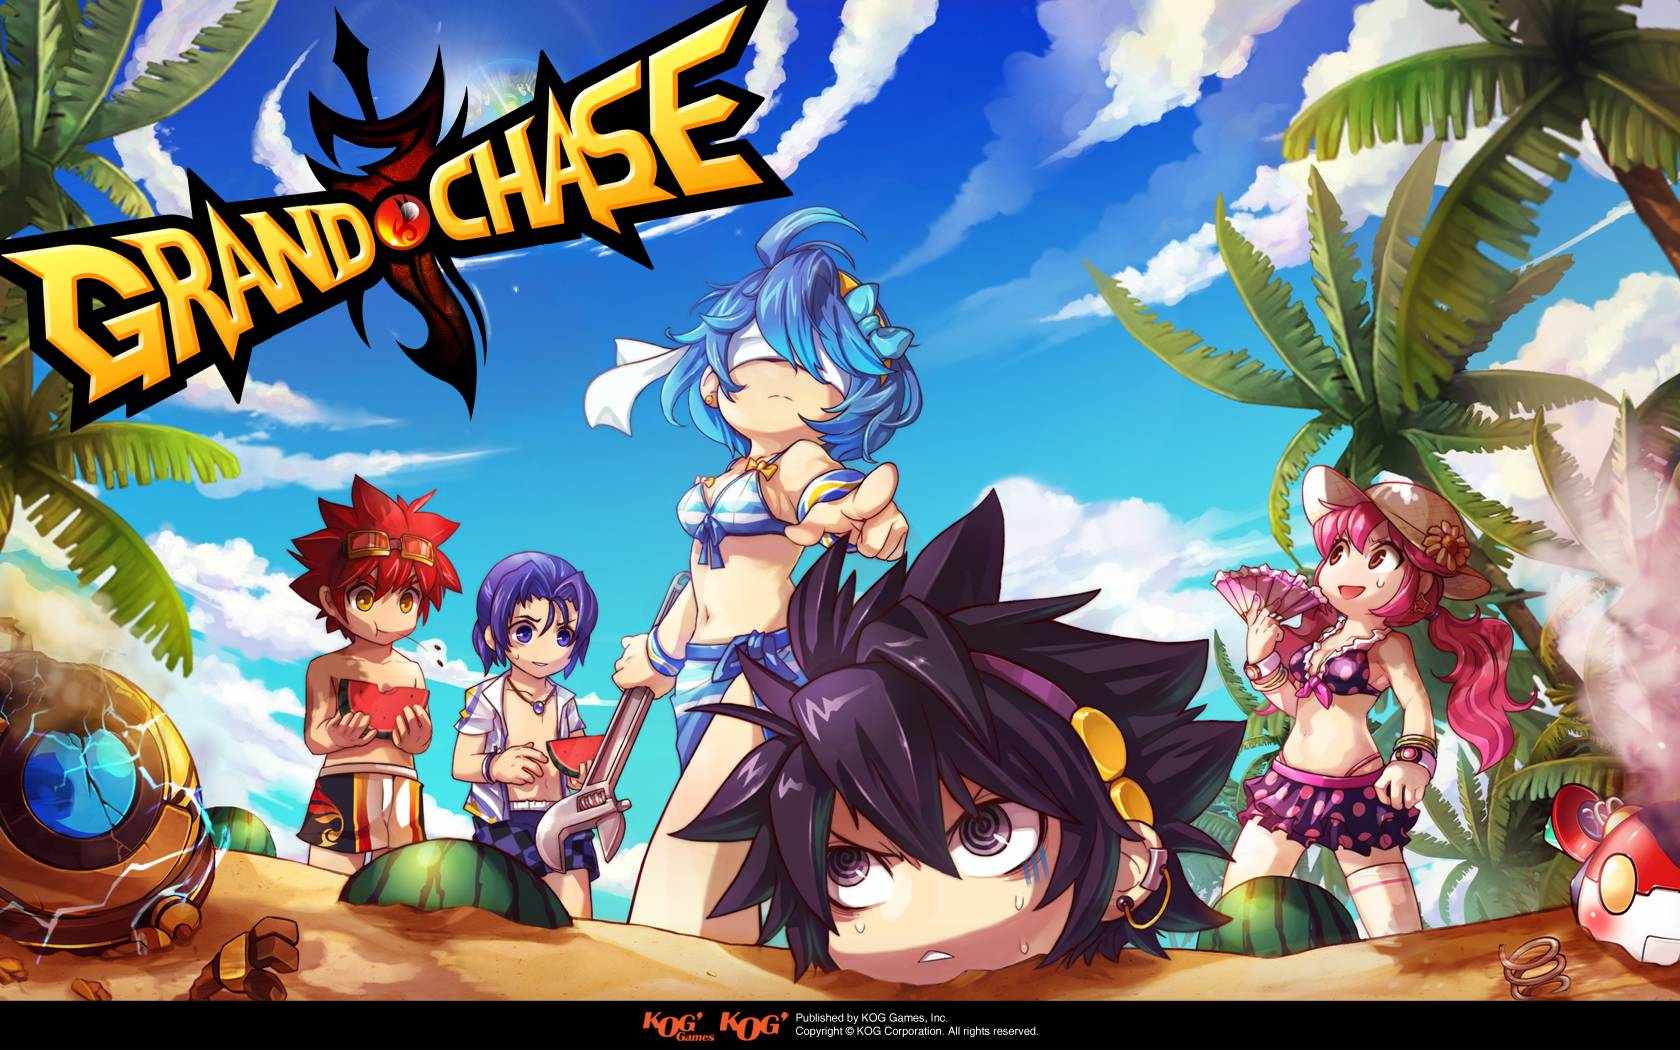 Grand Chase Wallpapers